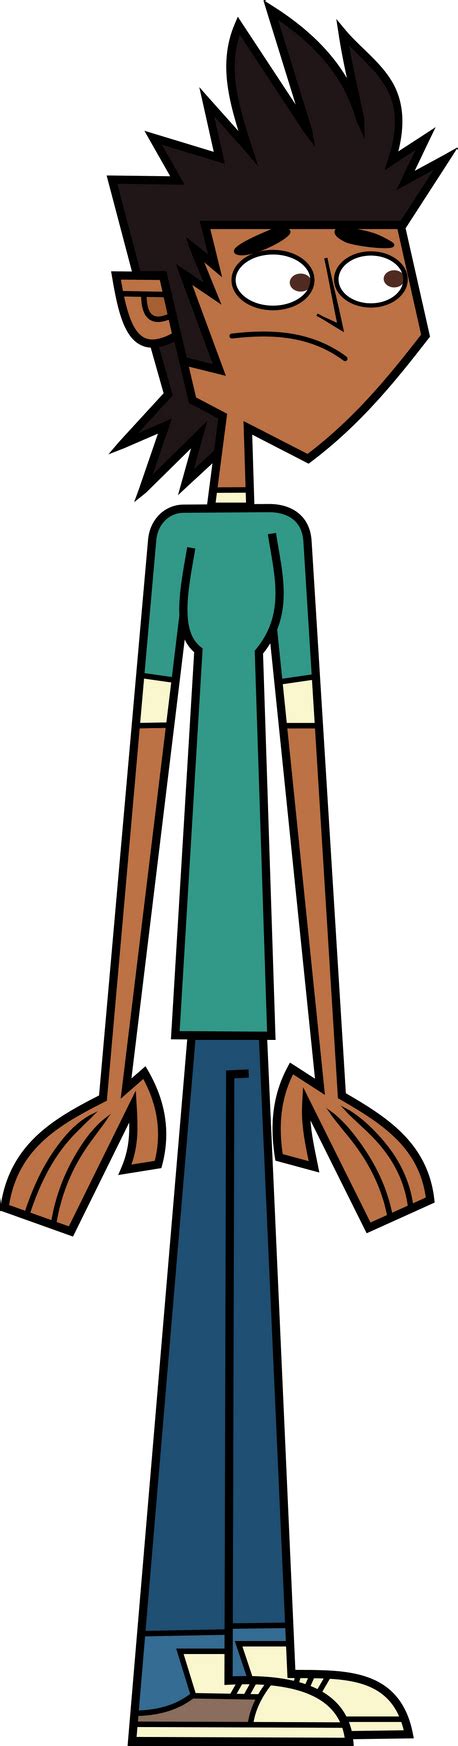 Mike Total Drama All Stars By Lilothestitch On Deviantart